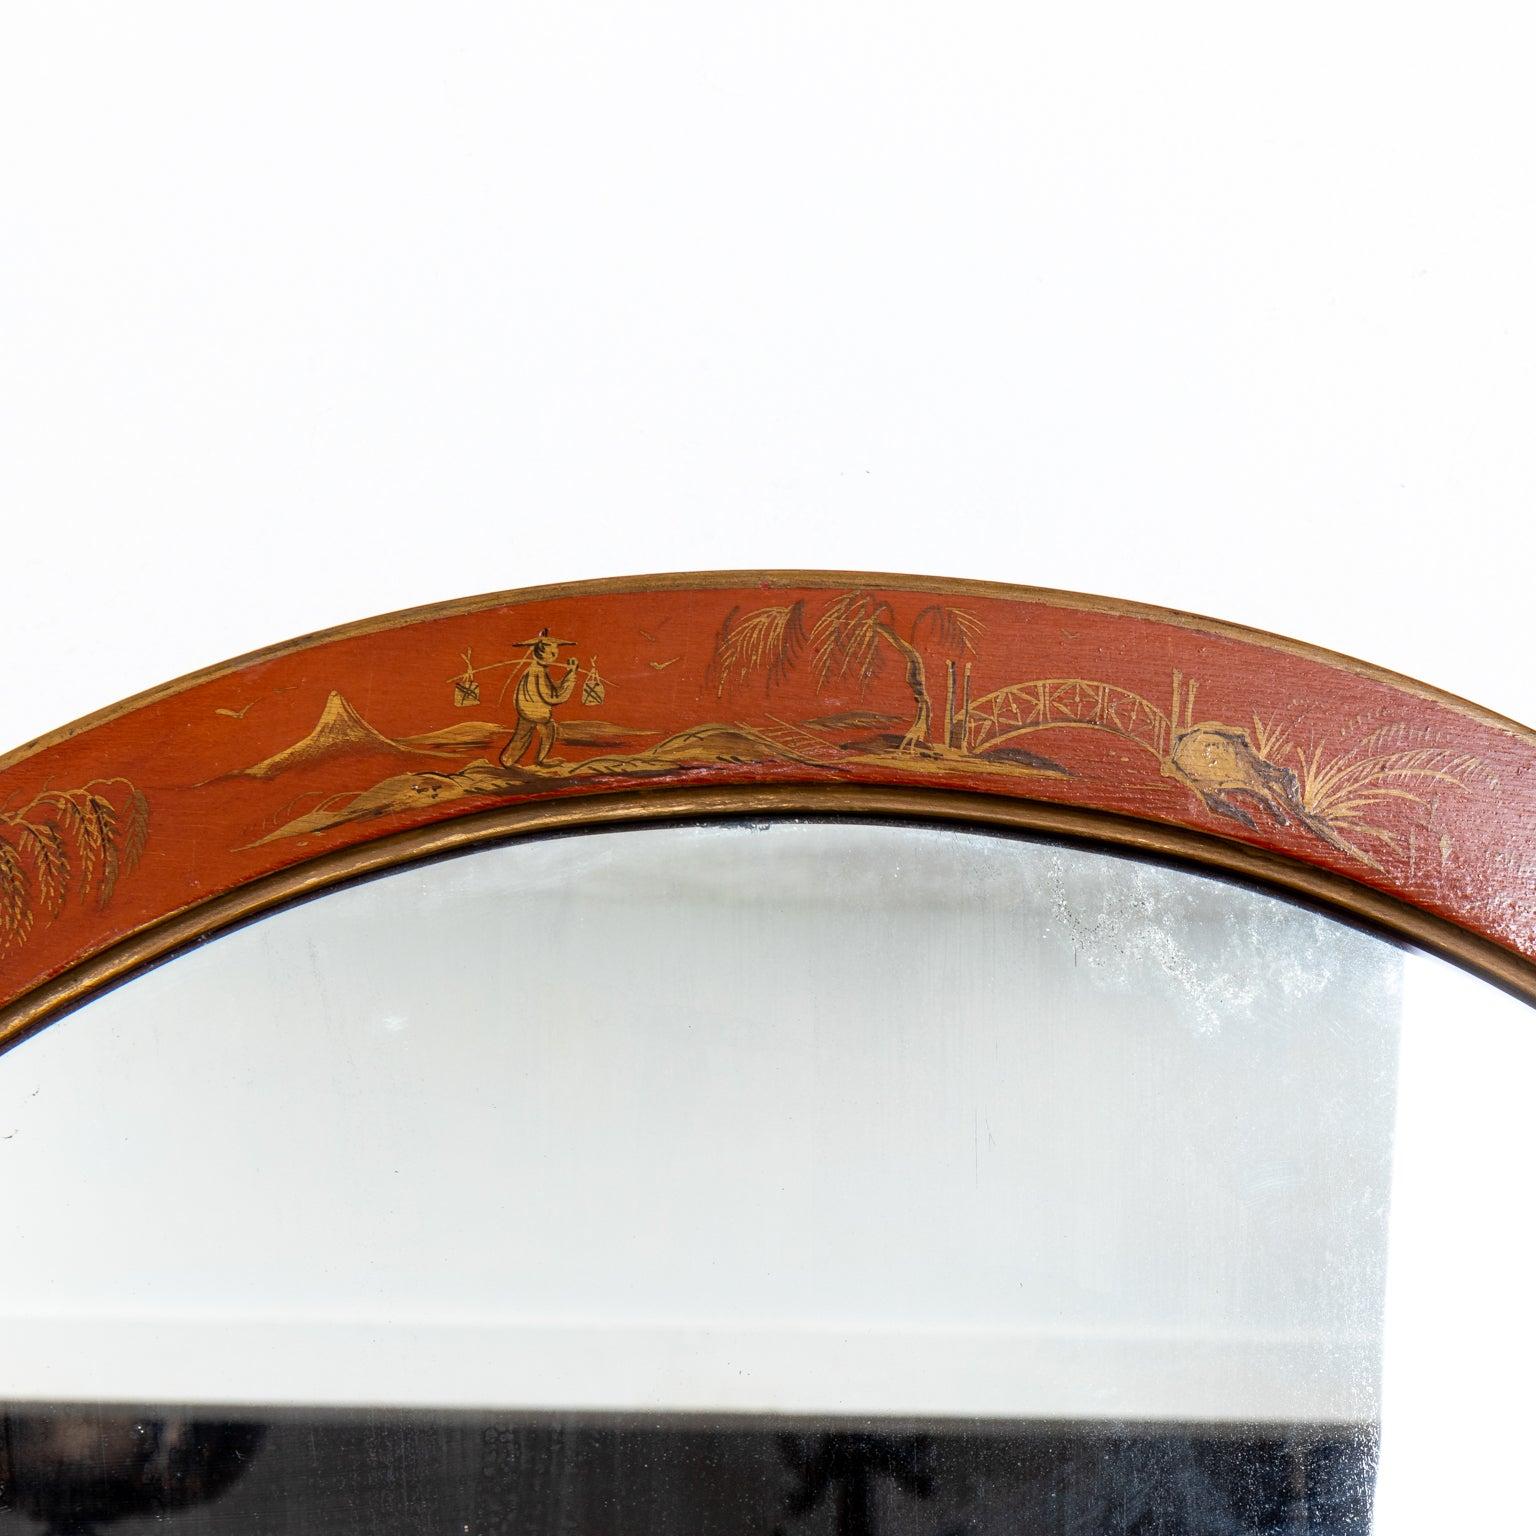 A vintage irving & casson red chinoiserie arched mirror with gilt detail. Circa 1940's and made in USA. Please note of wear consistent with age.
 